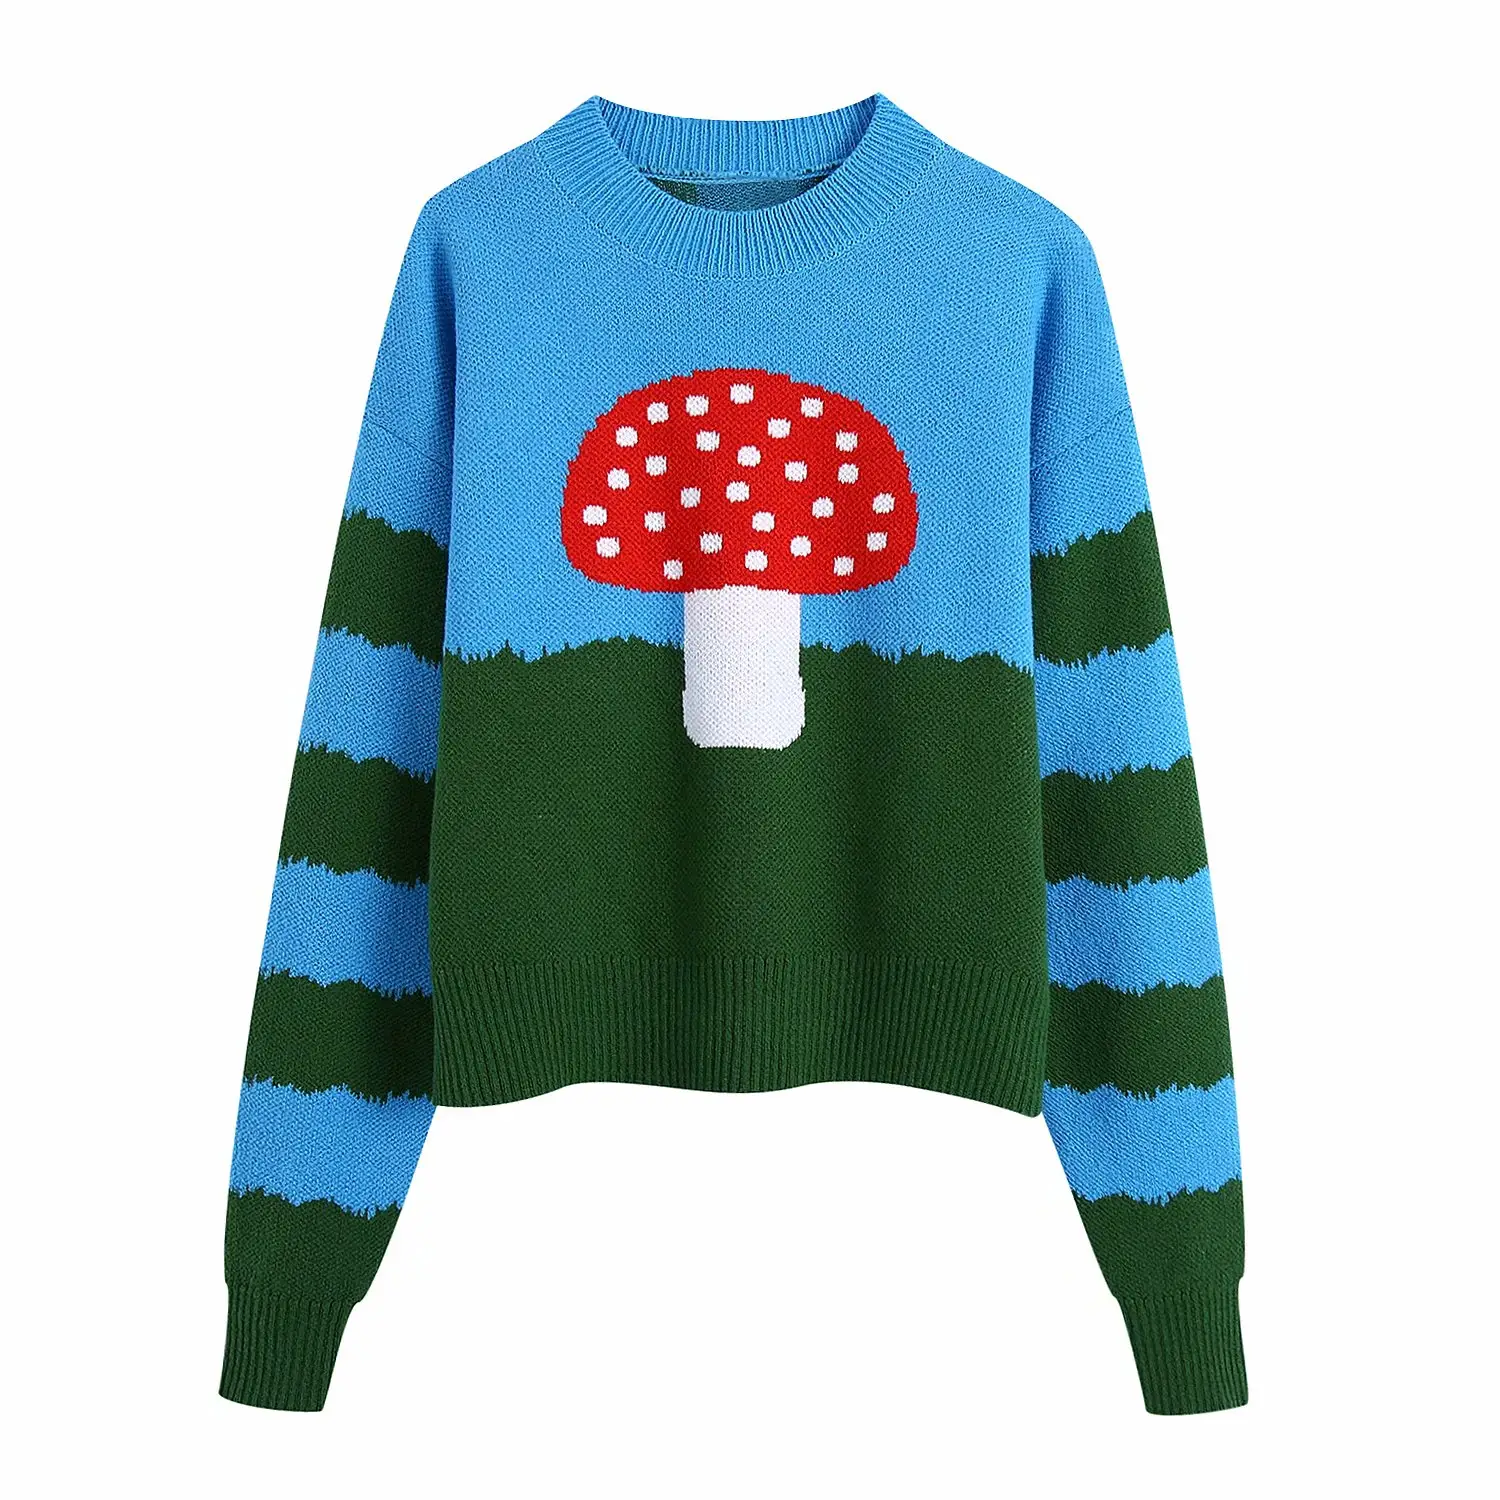 knitted Cute Knit Mushroom Knitwear Sweater Woman Long Sleeve O Neck Autumn Pullovers Girls stylish knitted pullover sweater